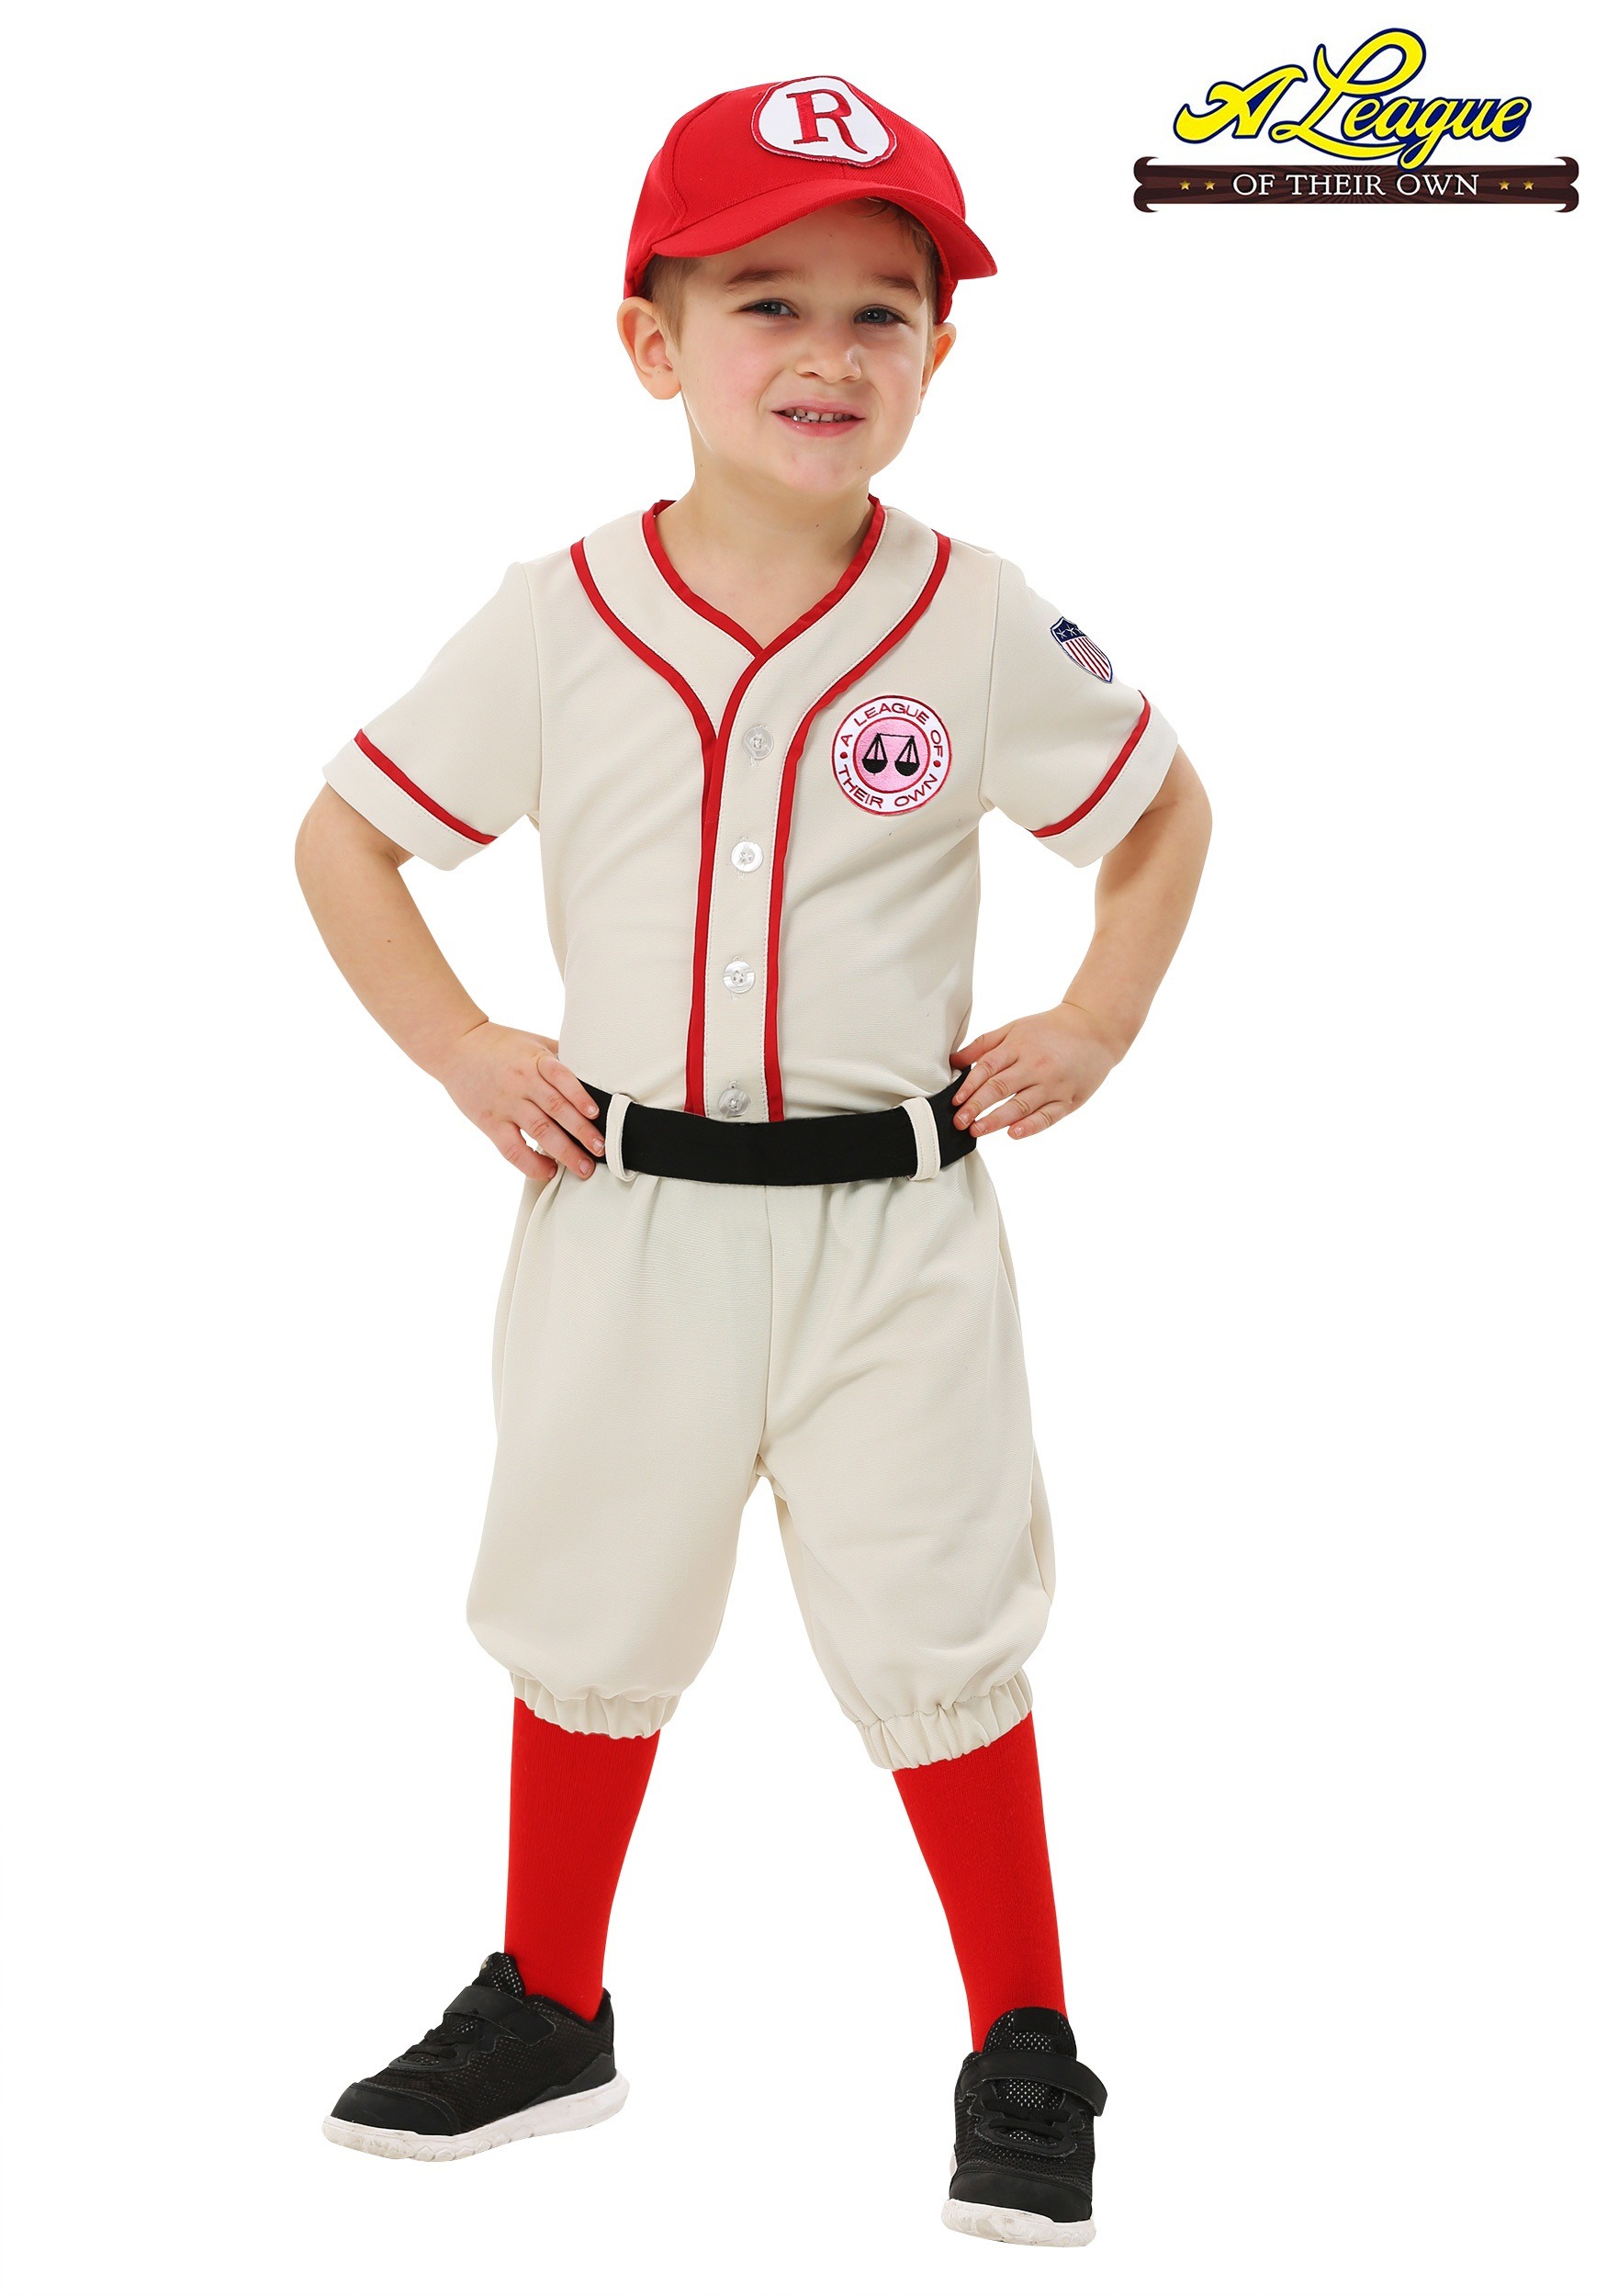 A League Of Their Own Toddler Jimmy Costume - image 3 of 3